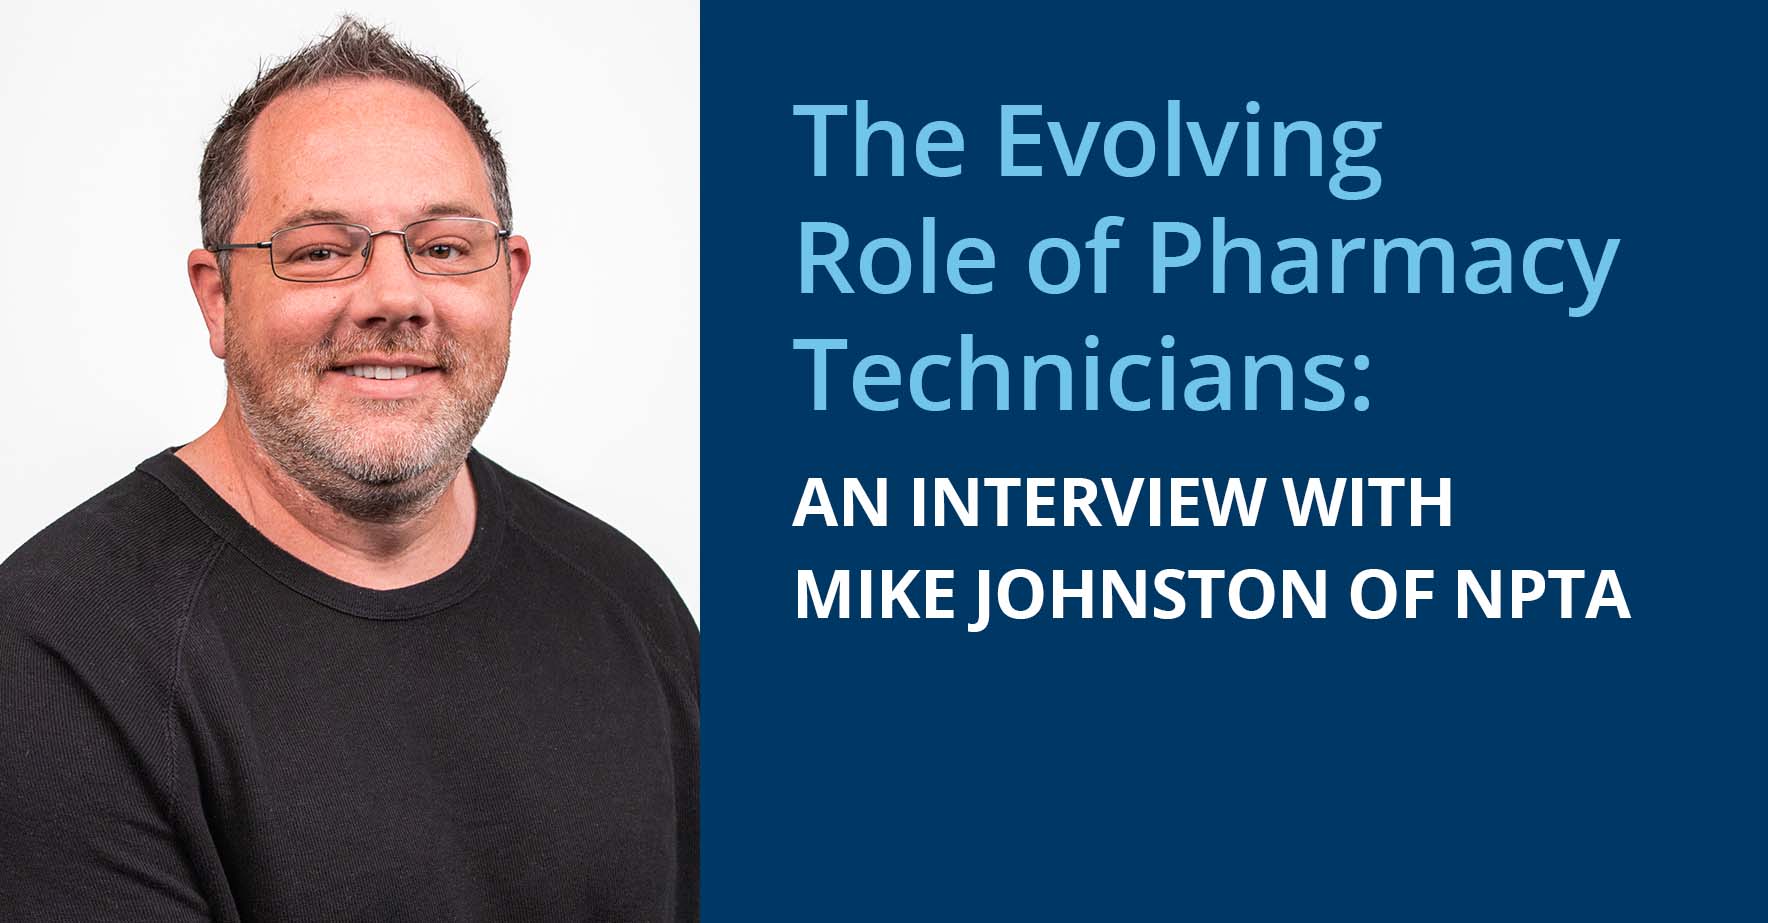 the_evolving_role_of_pharmacy_technicians_an_interview_with_mike_johnston_of_npta.jpg.